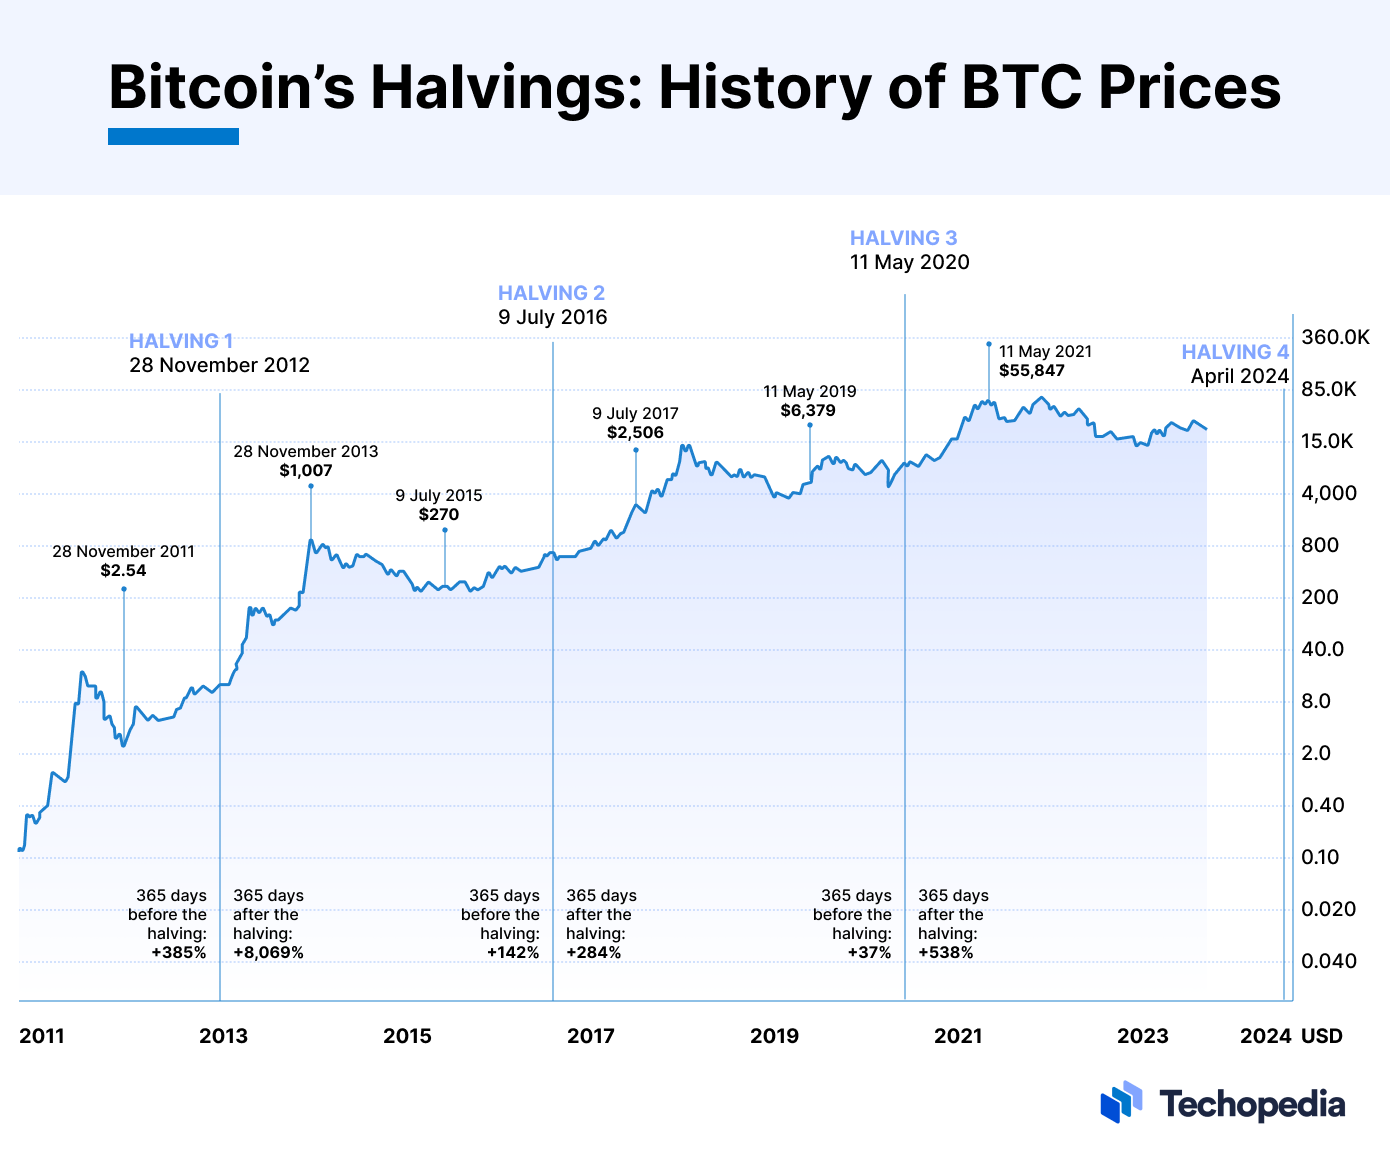 Bitcoin Cash Halving Countdown (Bitcoin Cash Halving Dates and Prices History)